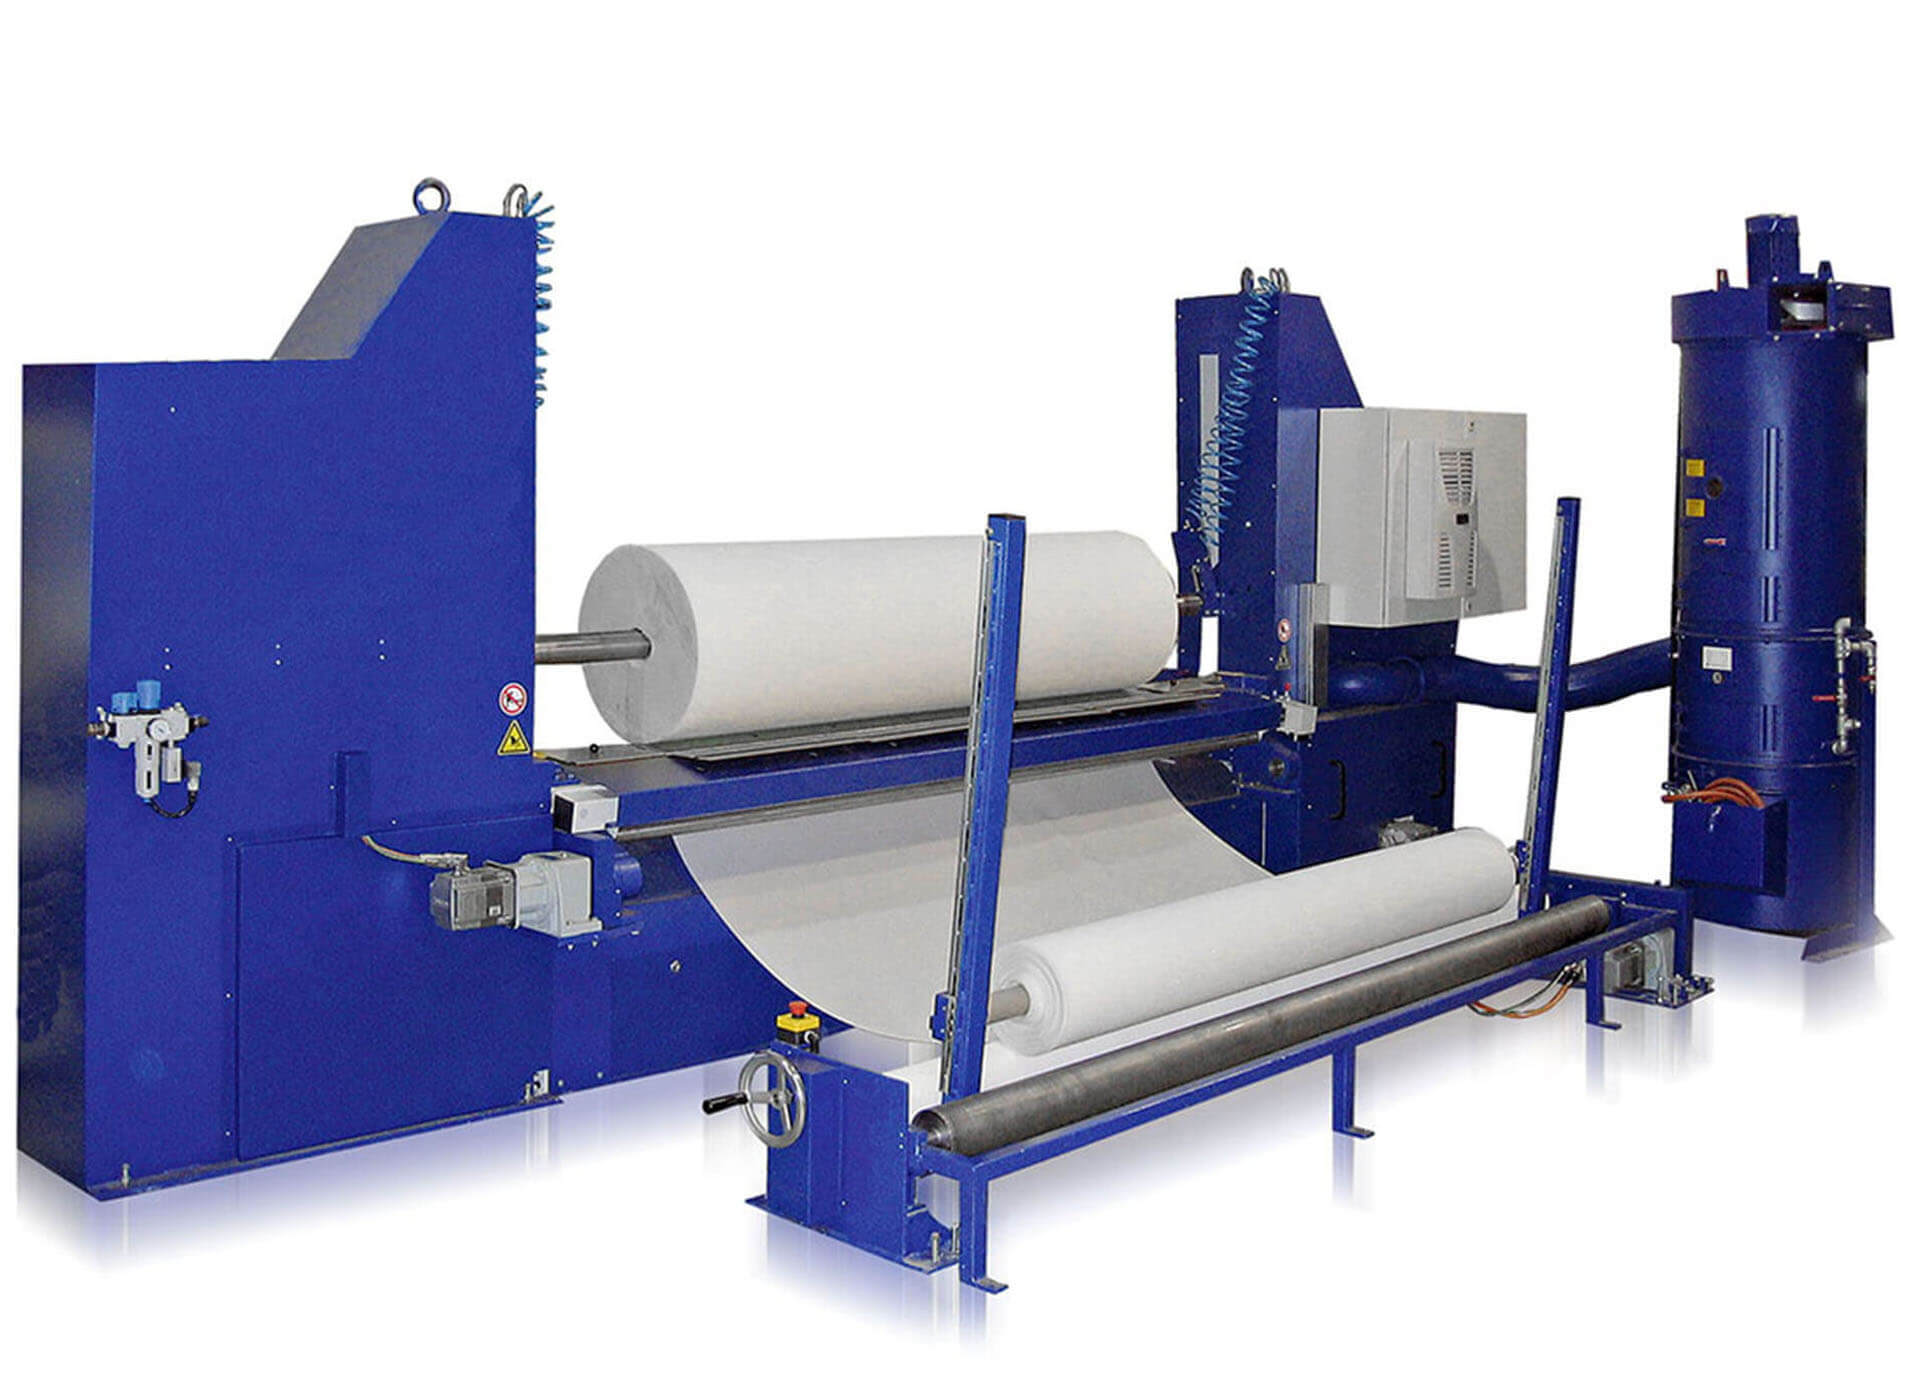 The foam peeling machine for block weights of up to 1000 kg